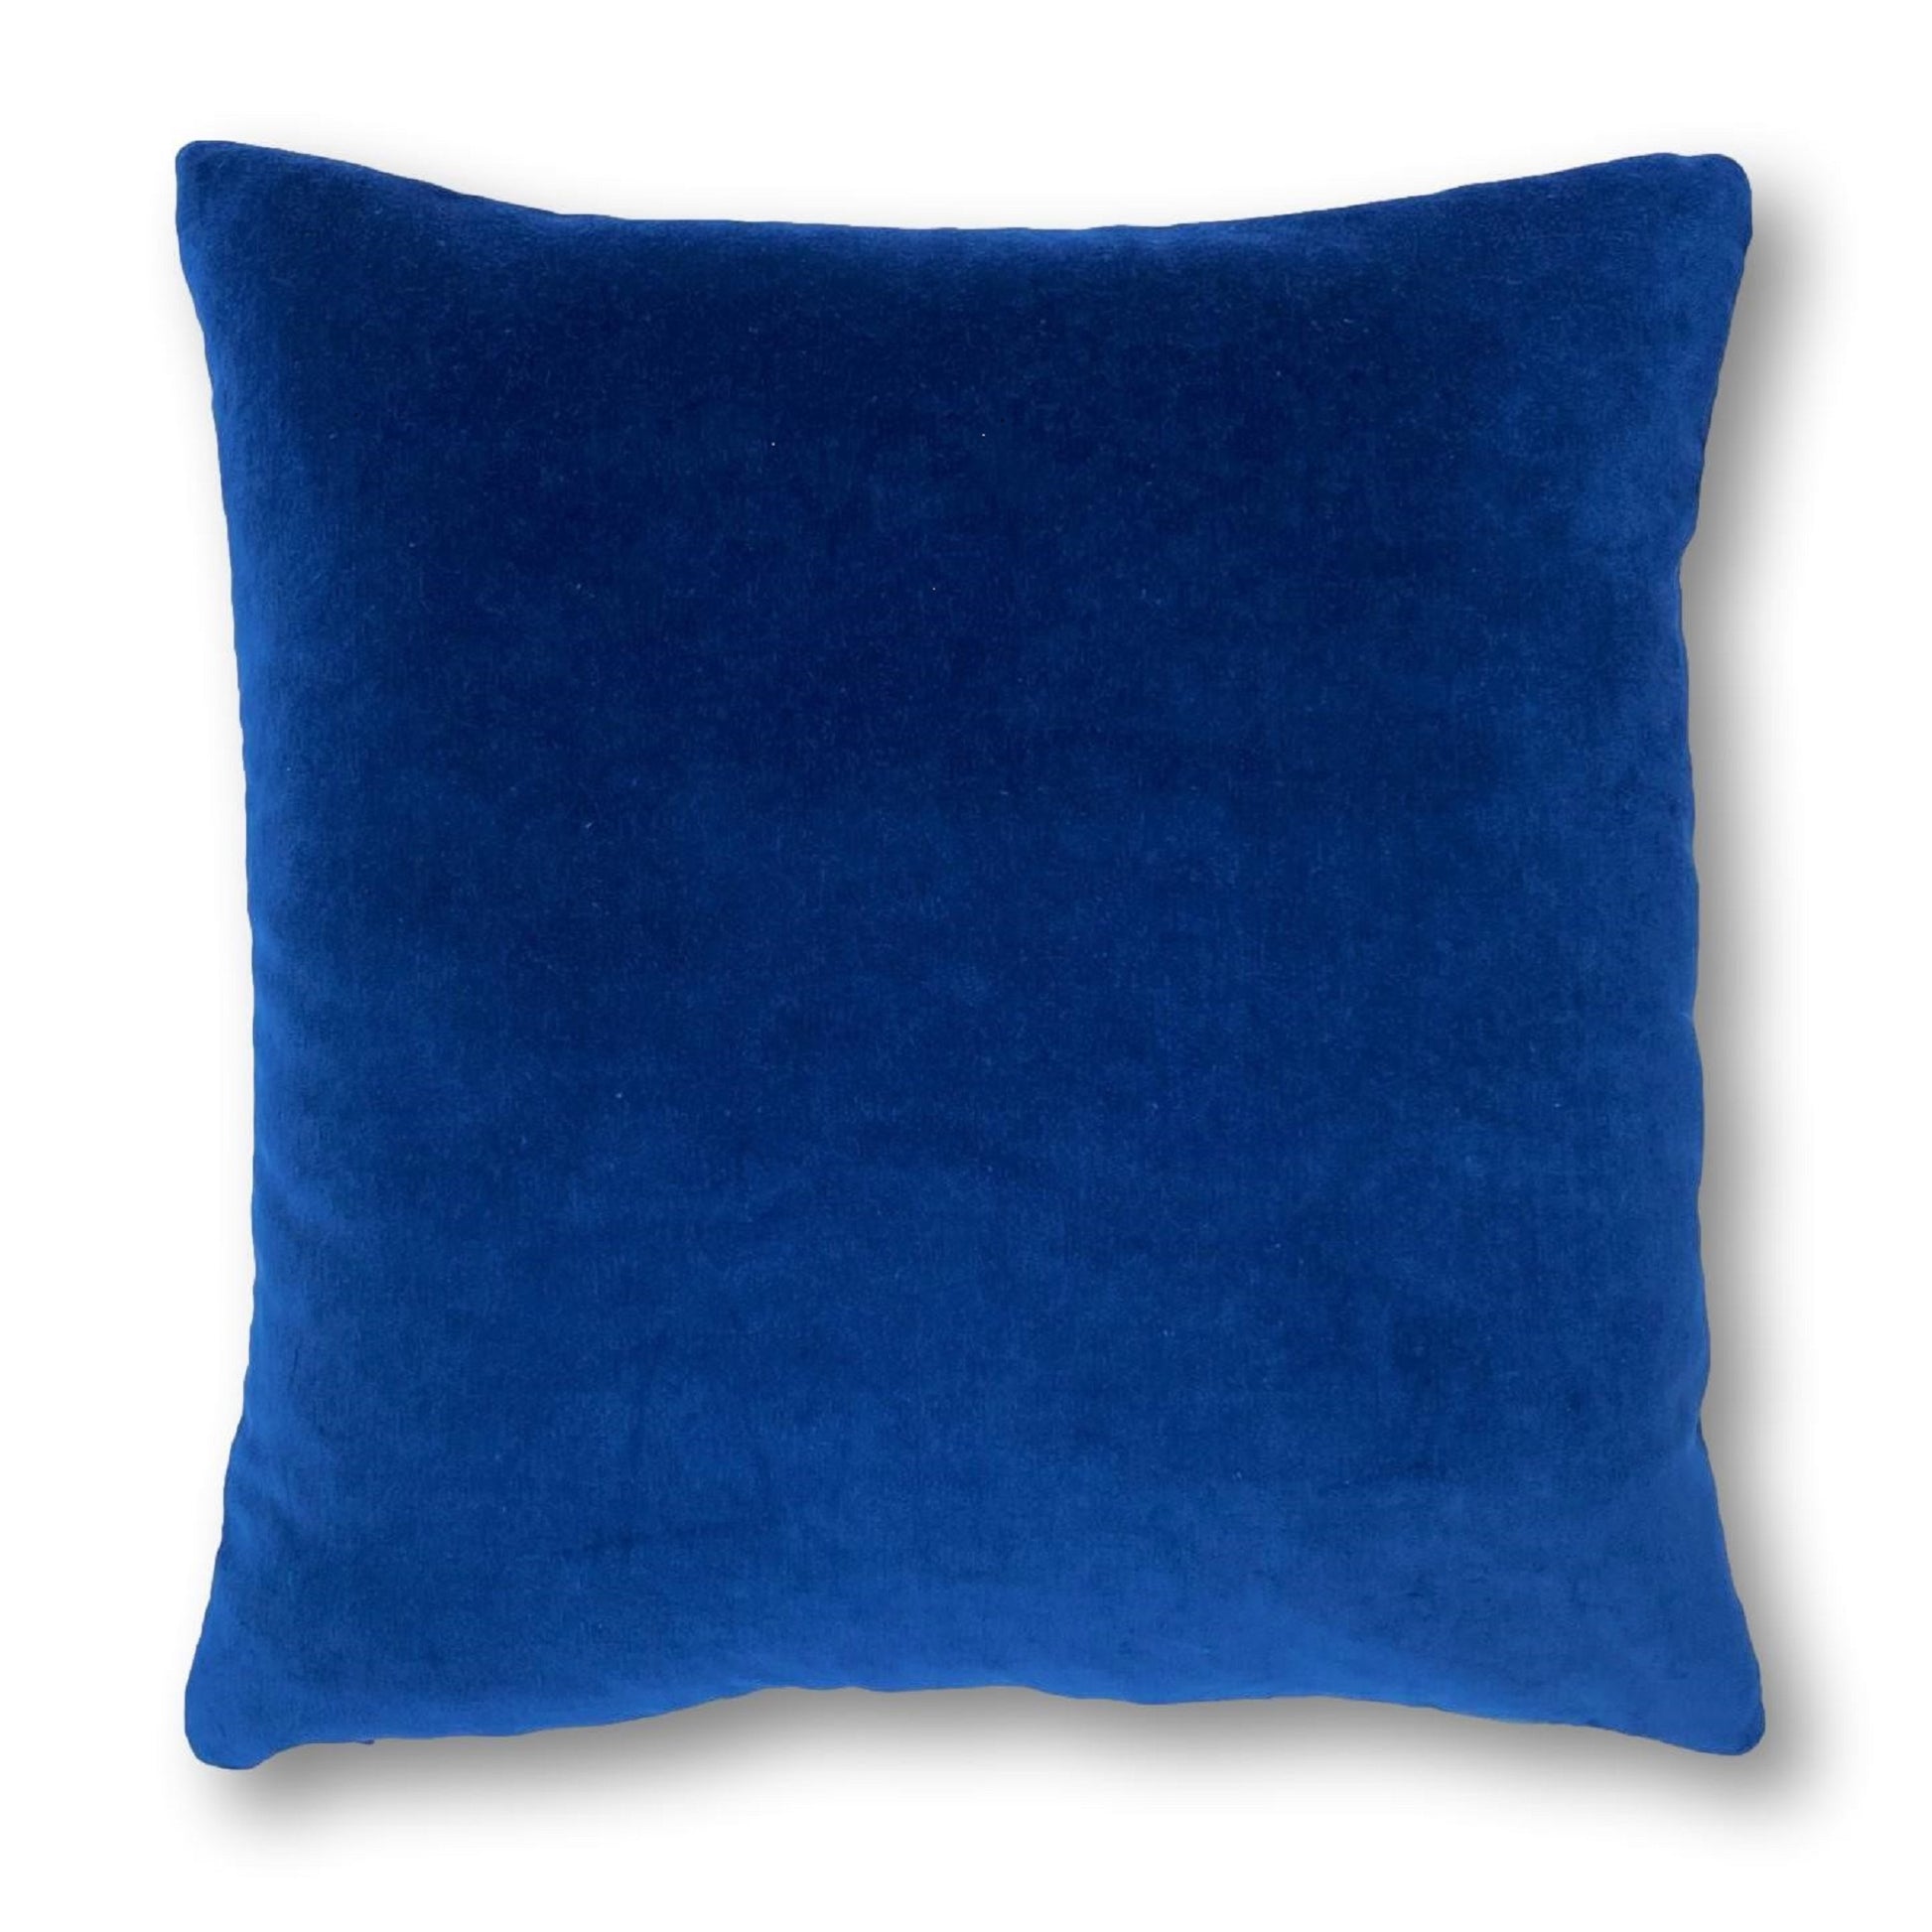 green and blue cushions luxe 39